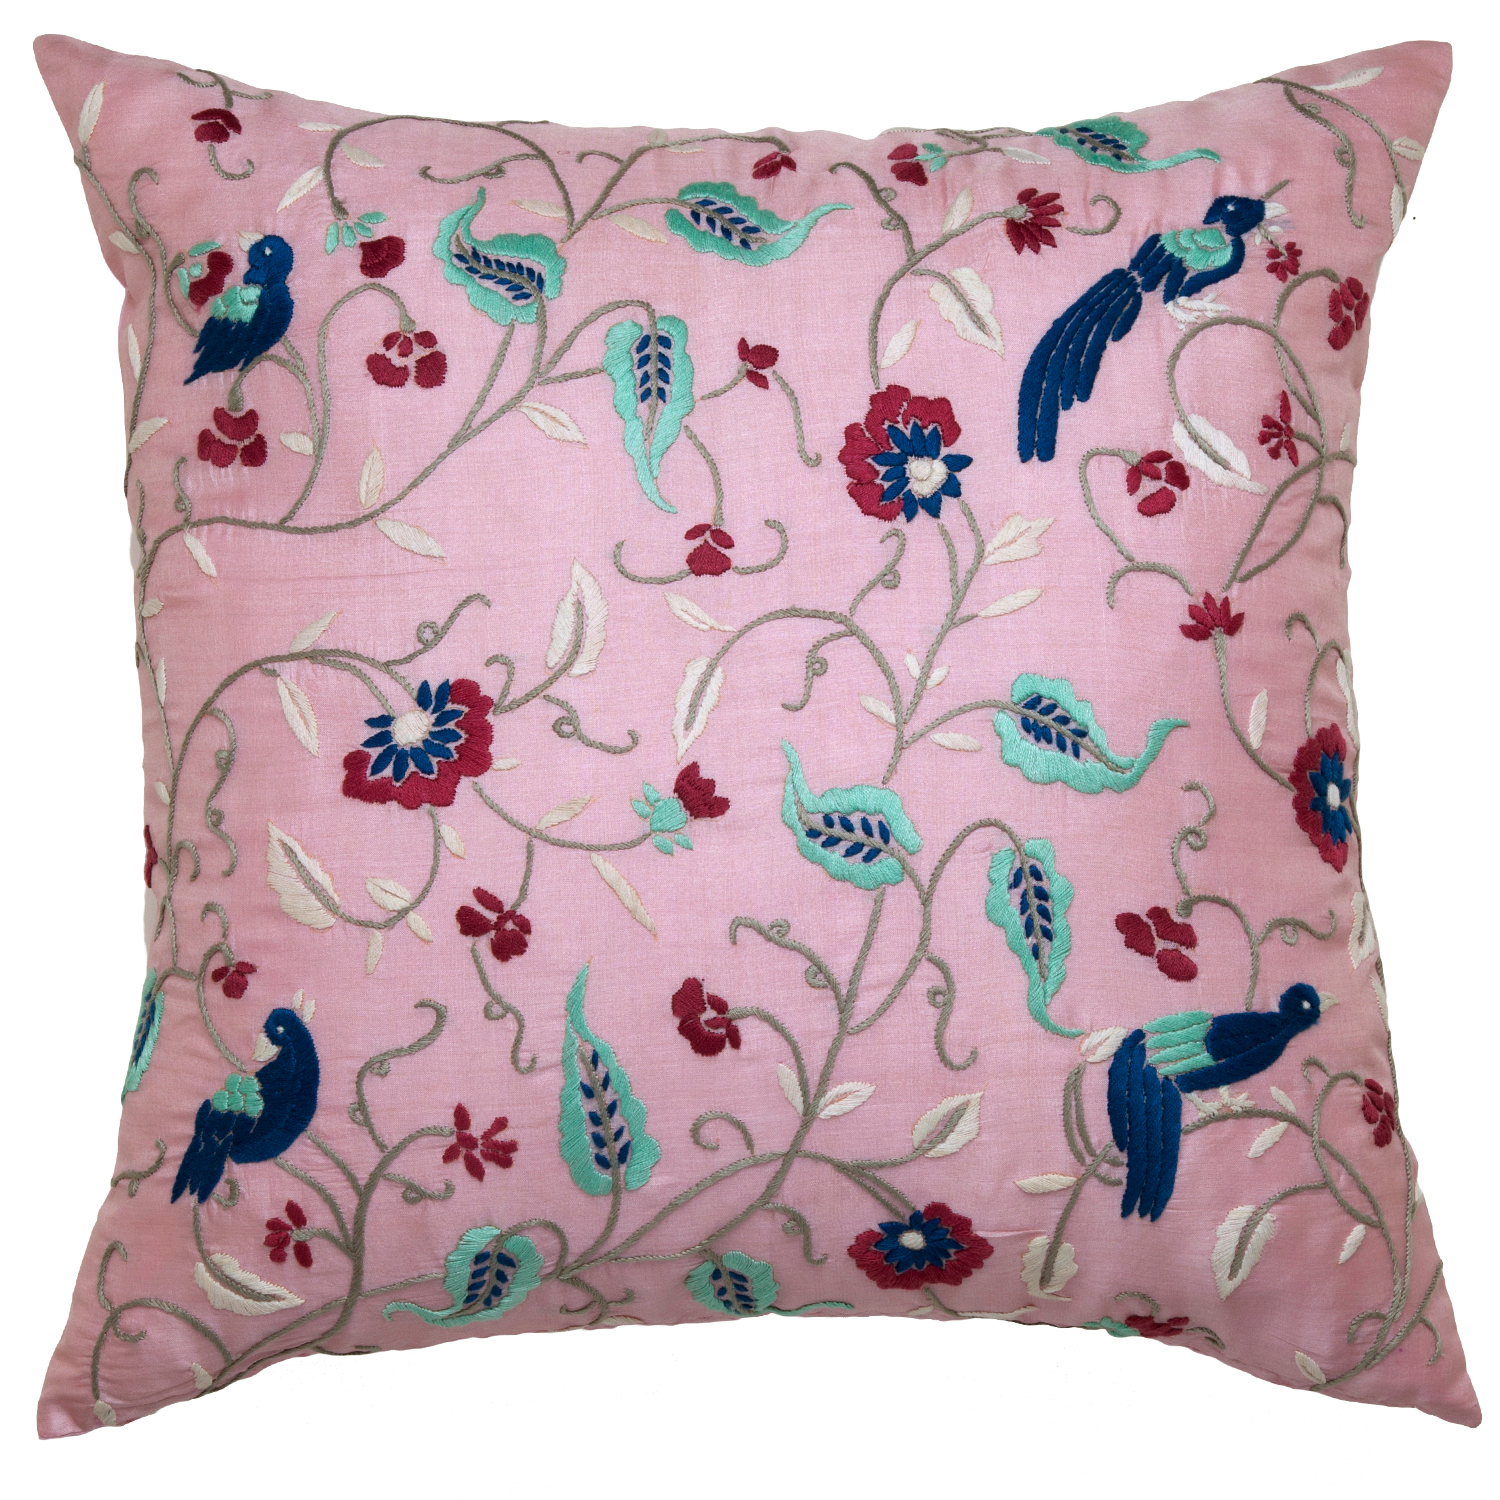 https://marigoldliving.com/mm5/graphics/00000001/Marigold%20Living%20Persian%20Pheasants%20Pink%20Parsi%20hand%20embroidered%20pillow%20cover%20R.jpg